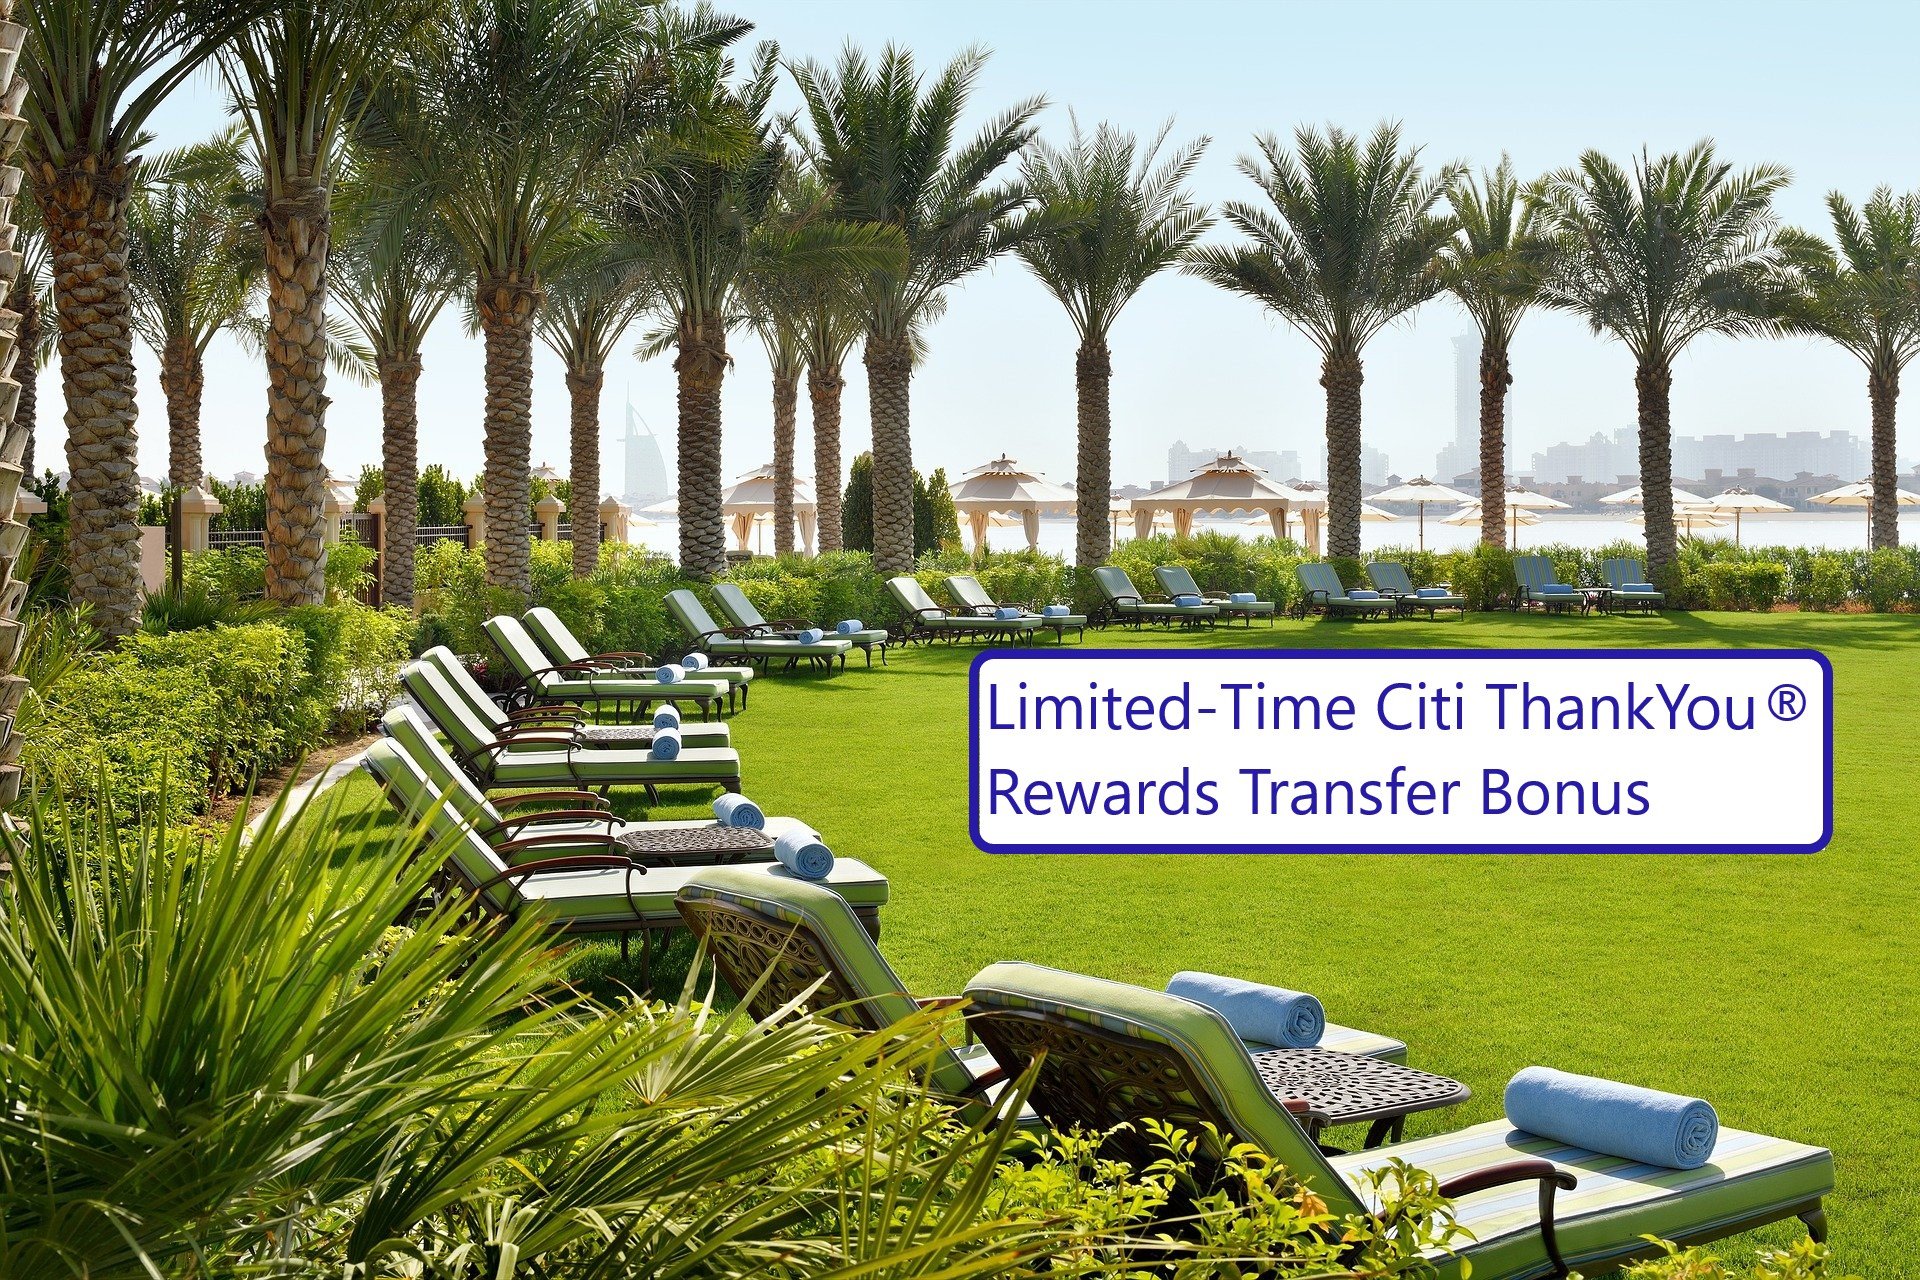 Accor Live Limitless and Citi ThankYou Points Transfer